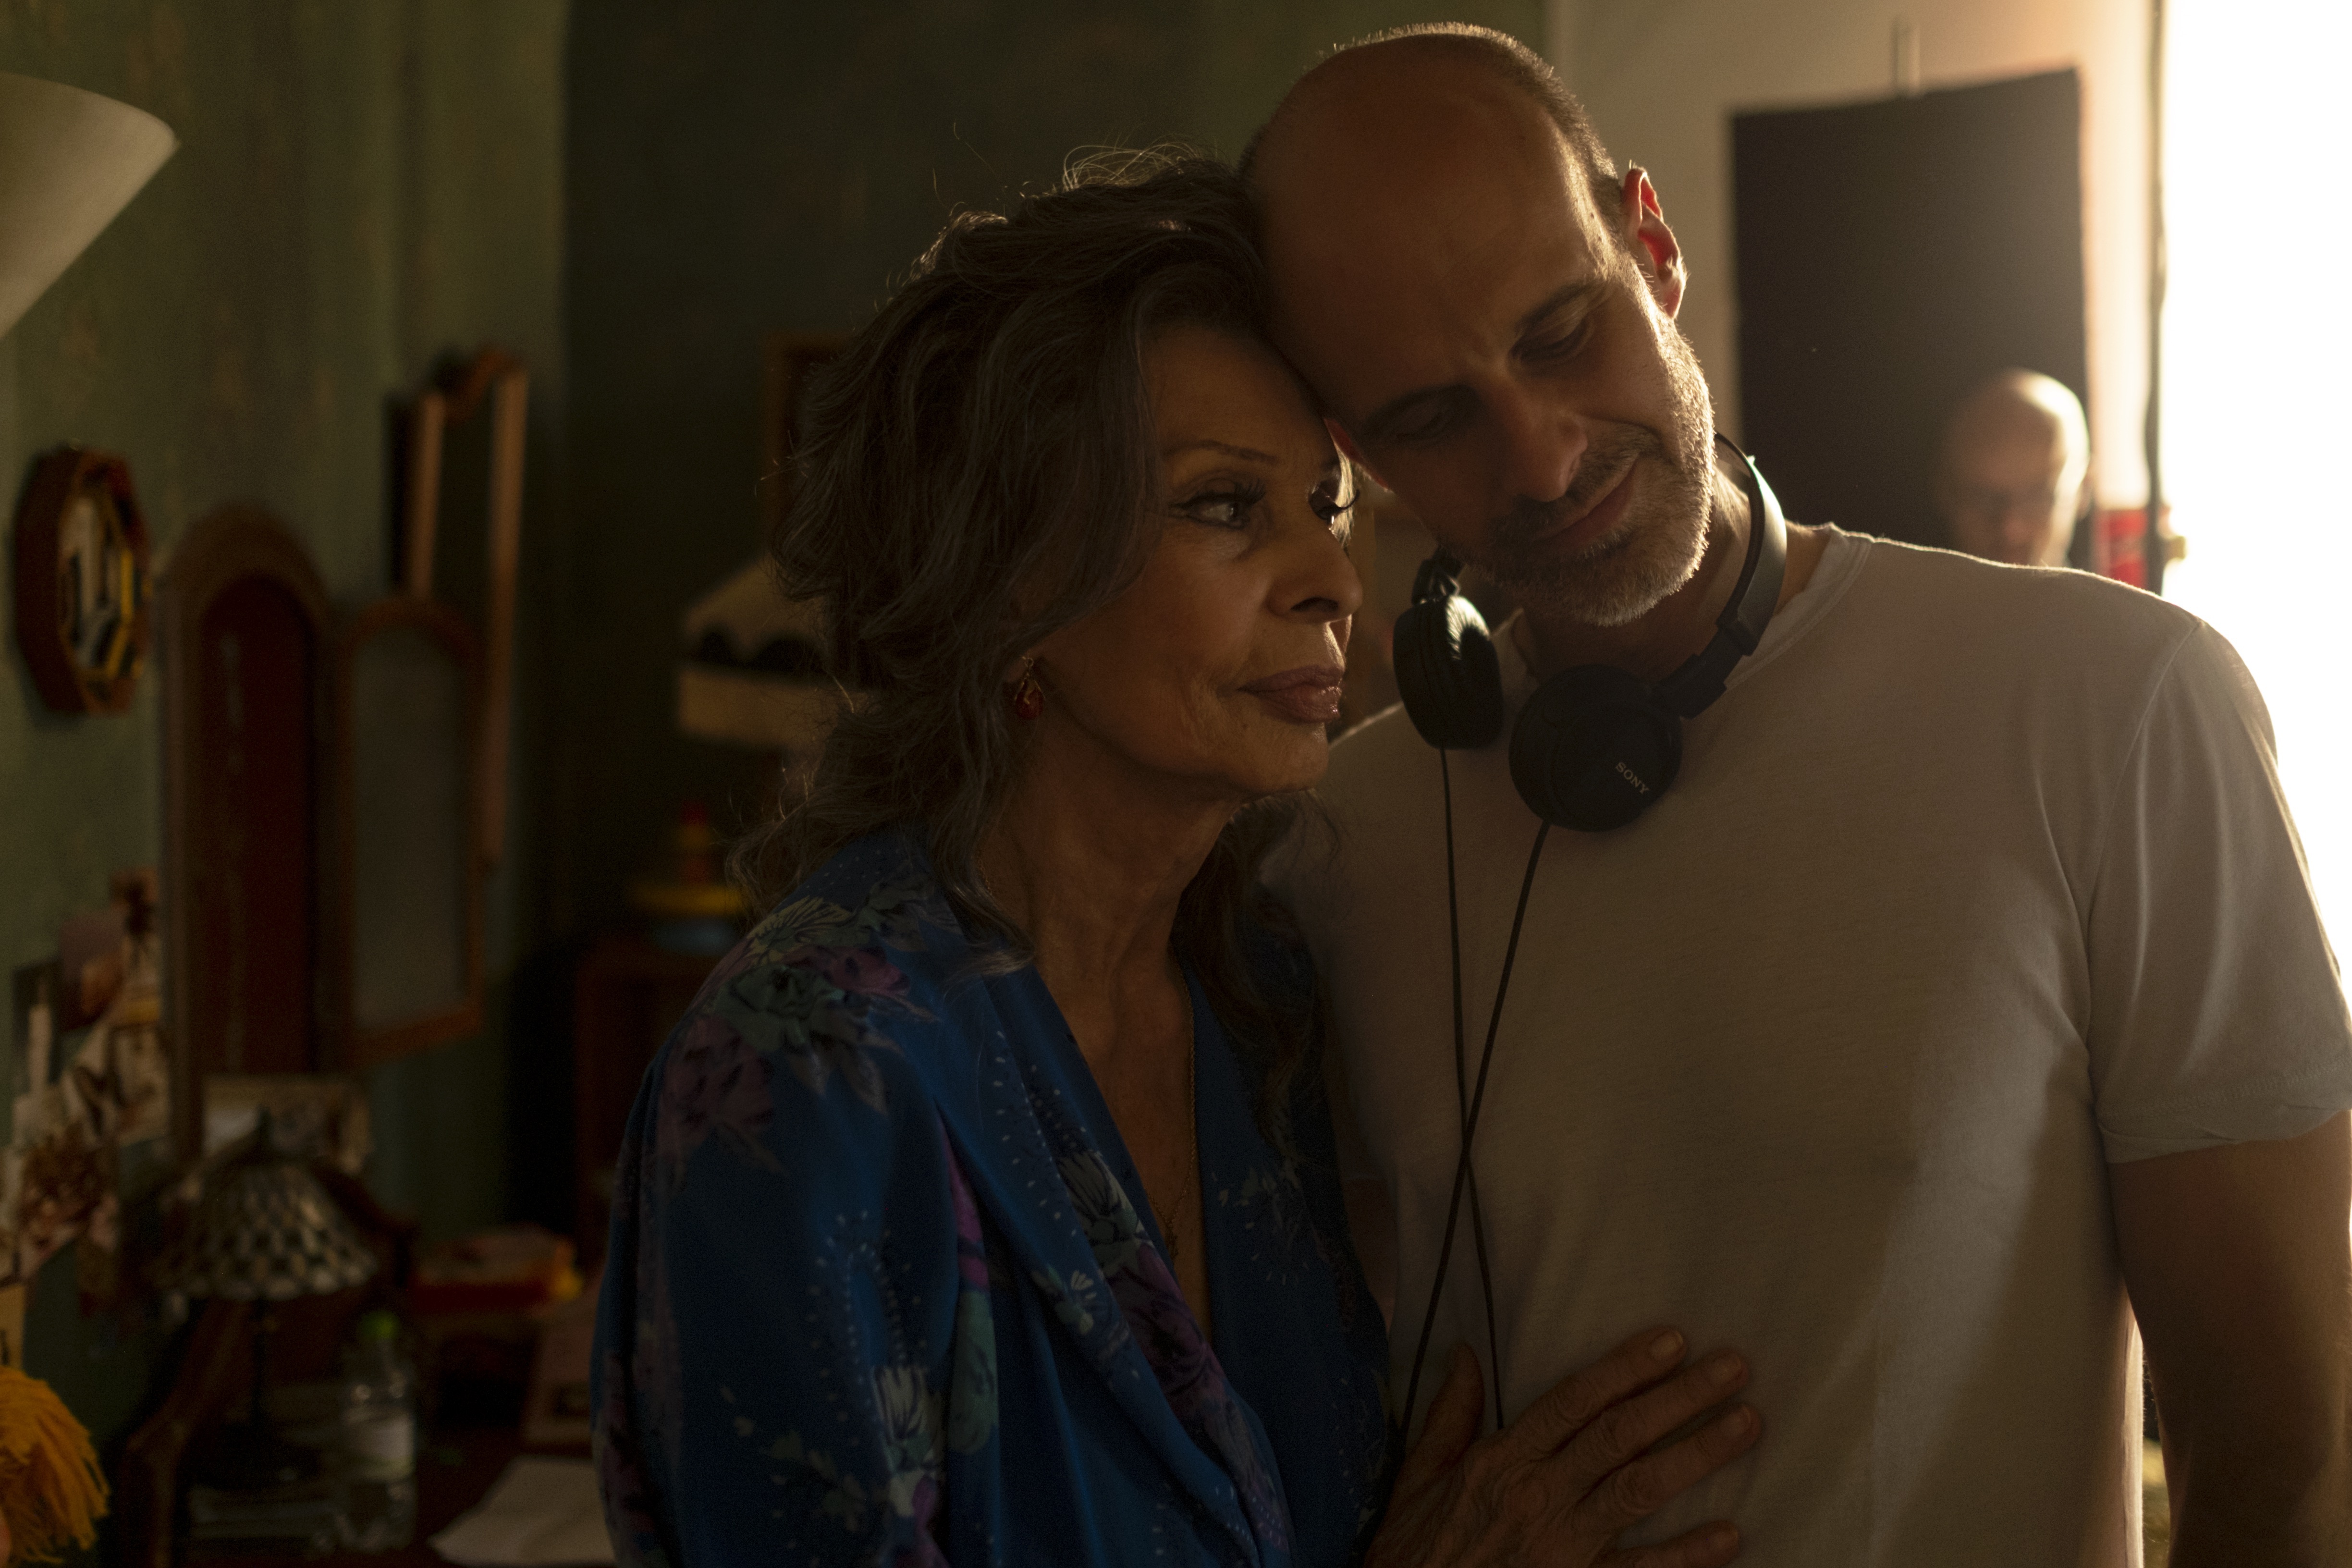 WATCH: Sophia Loren Triumphantly Returns to the Screen in ‘The Life Ahead’